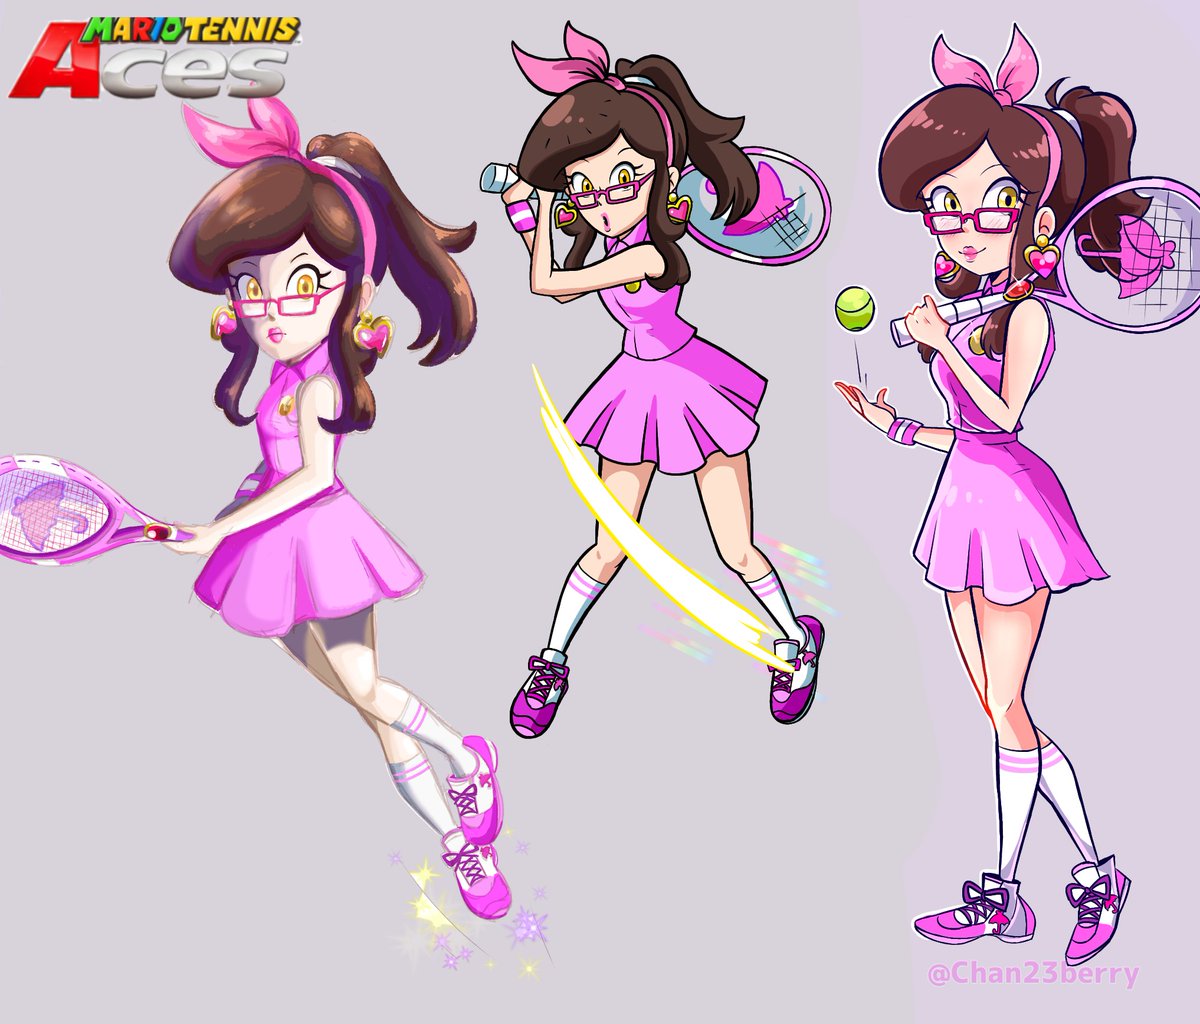 🌷✨Biggest tulip super mario tennis aces 🎾 

It would be fun to play with her I imagine she sometimes floats on the court when she moves or releases some magical glows ✨☂️

#SuperMarioBros #SuperMarioOdyssey #Nintendo #Fancharacter #Concepart #Tulip #Mariotennis